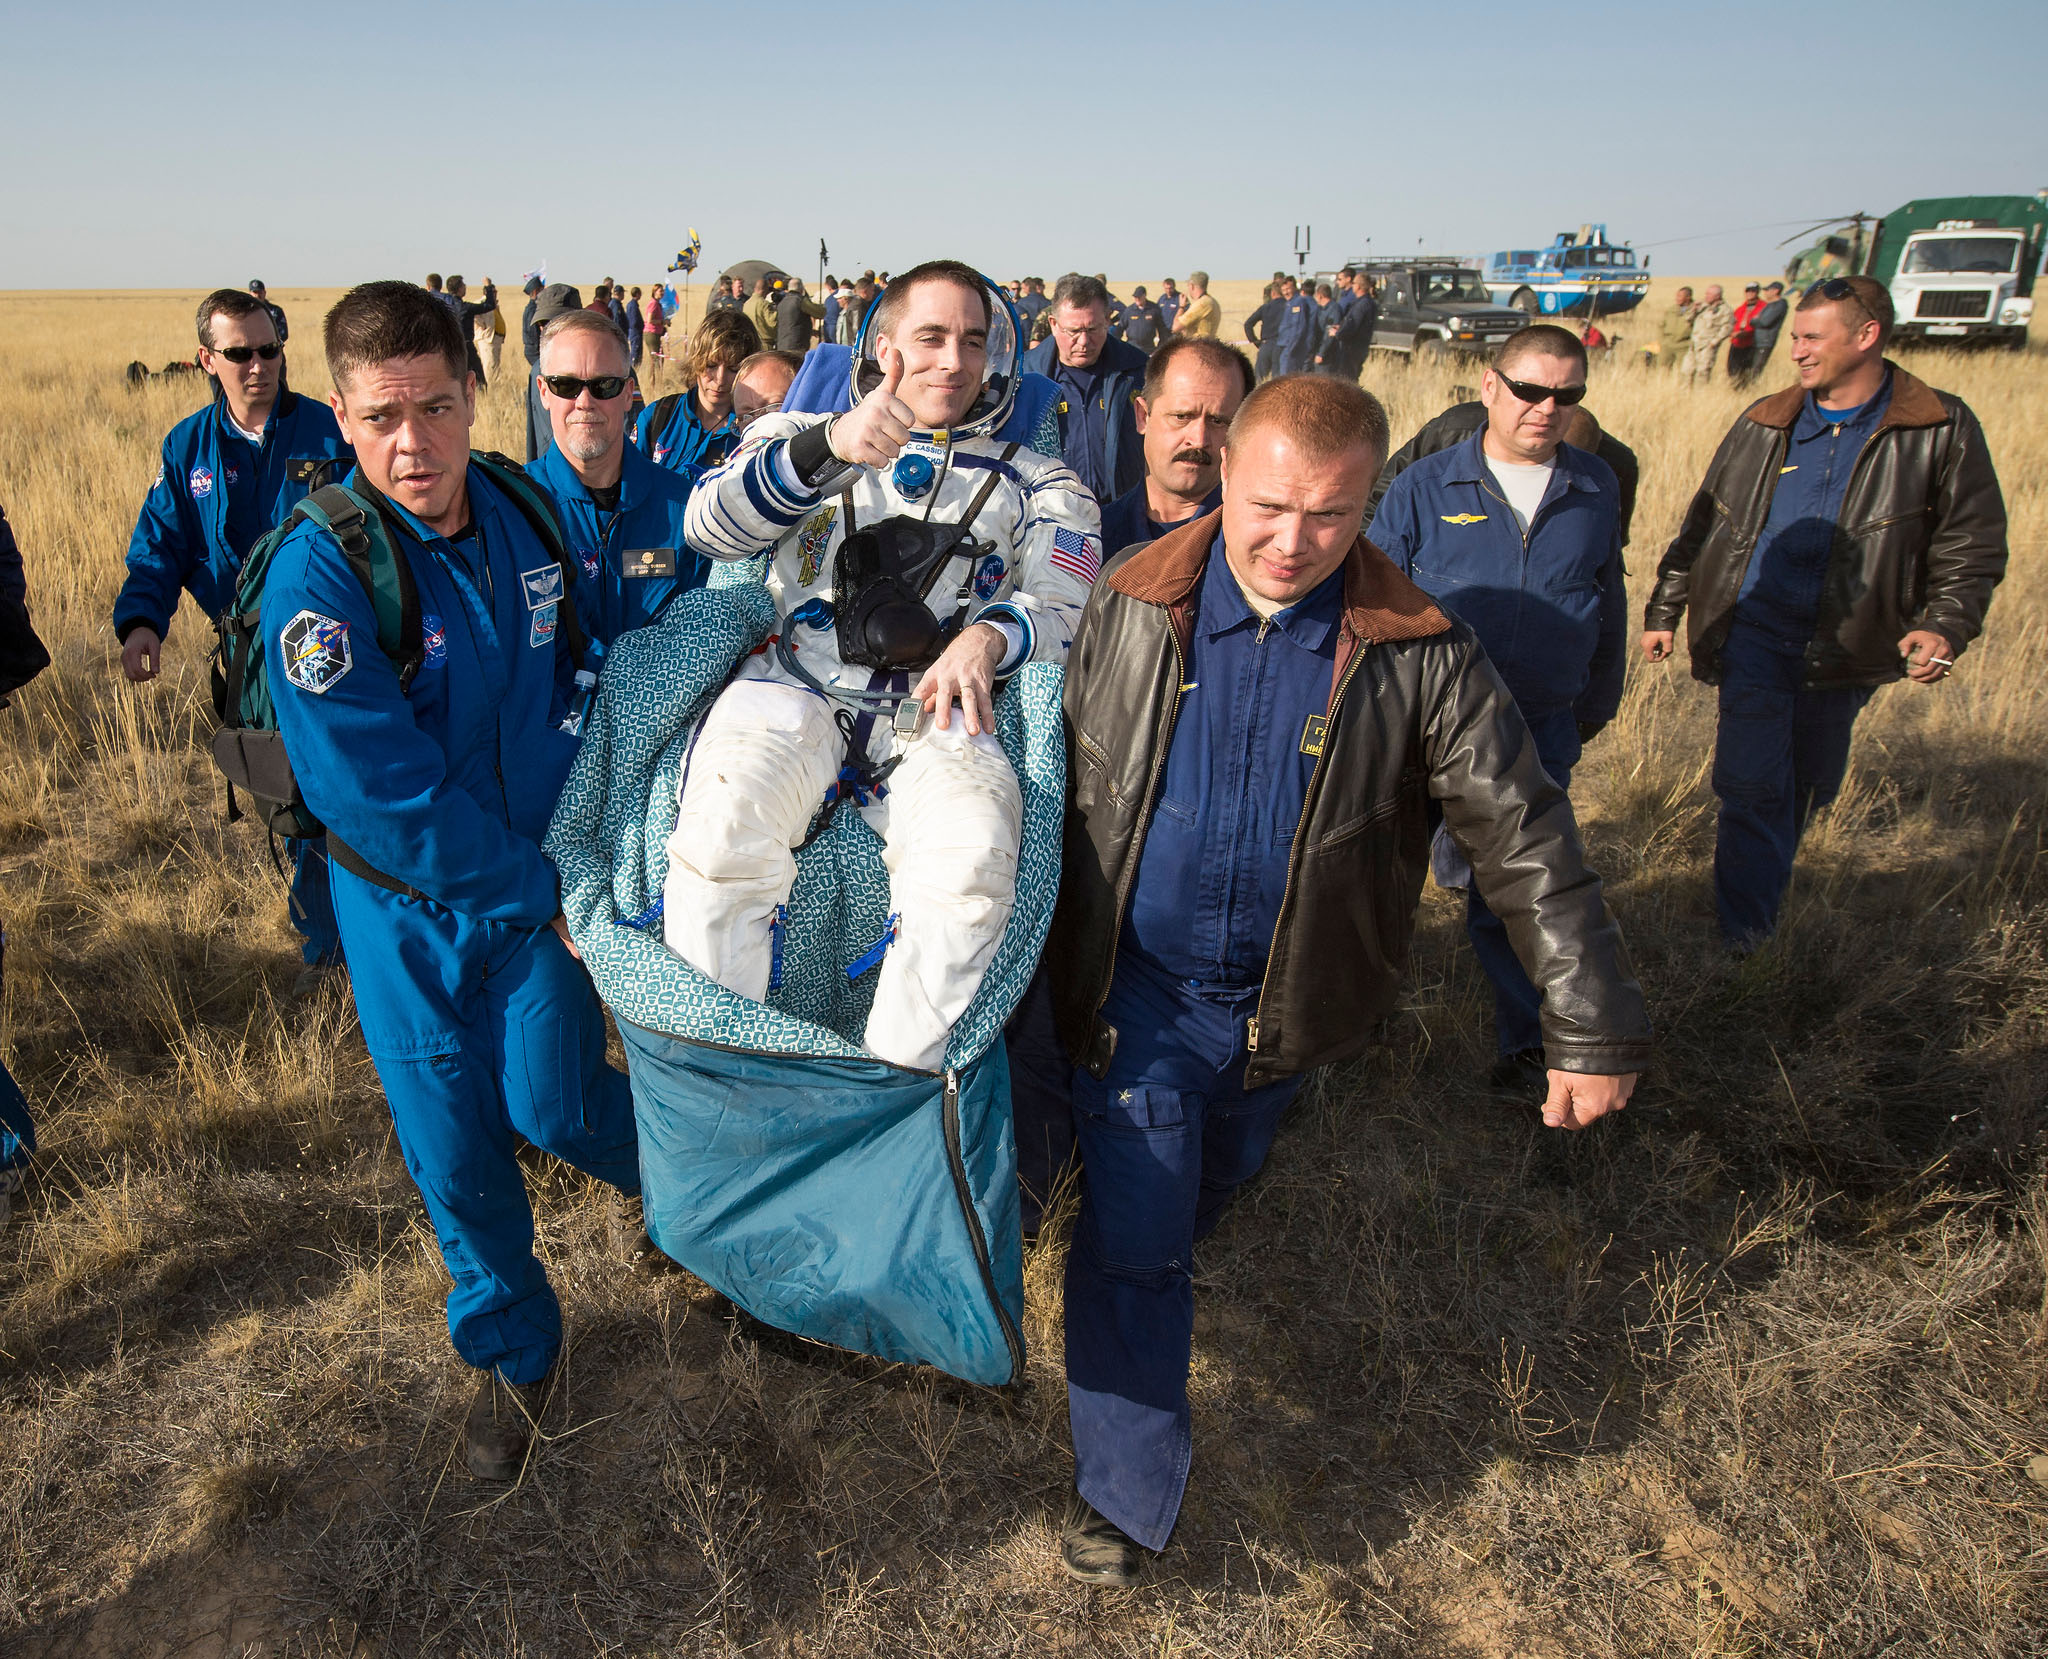 Chris Cassidy is helped from Soyuz TMA-08M by a group of supportive hands, including Chief Astronaut Bob Behnken (left) in September 2013. Behnken has now handed the reins of the Astronaut Office to Cassidy as the next chief. Photo Credit: NASA